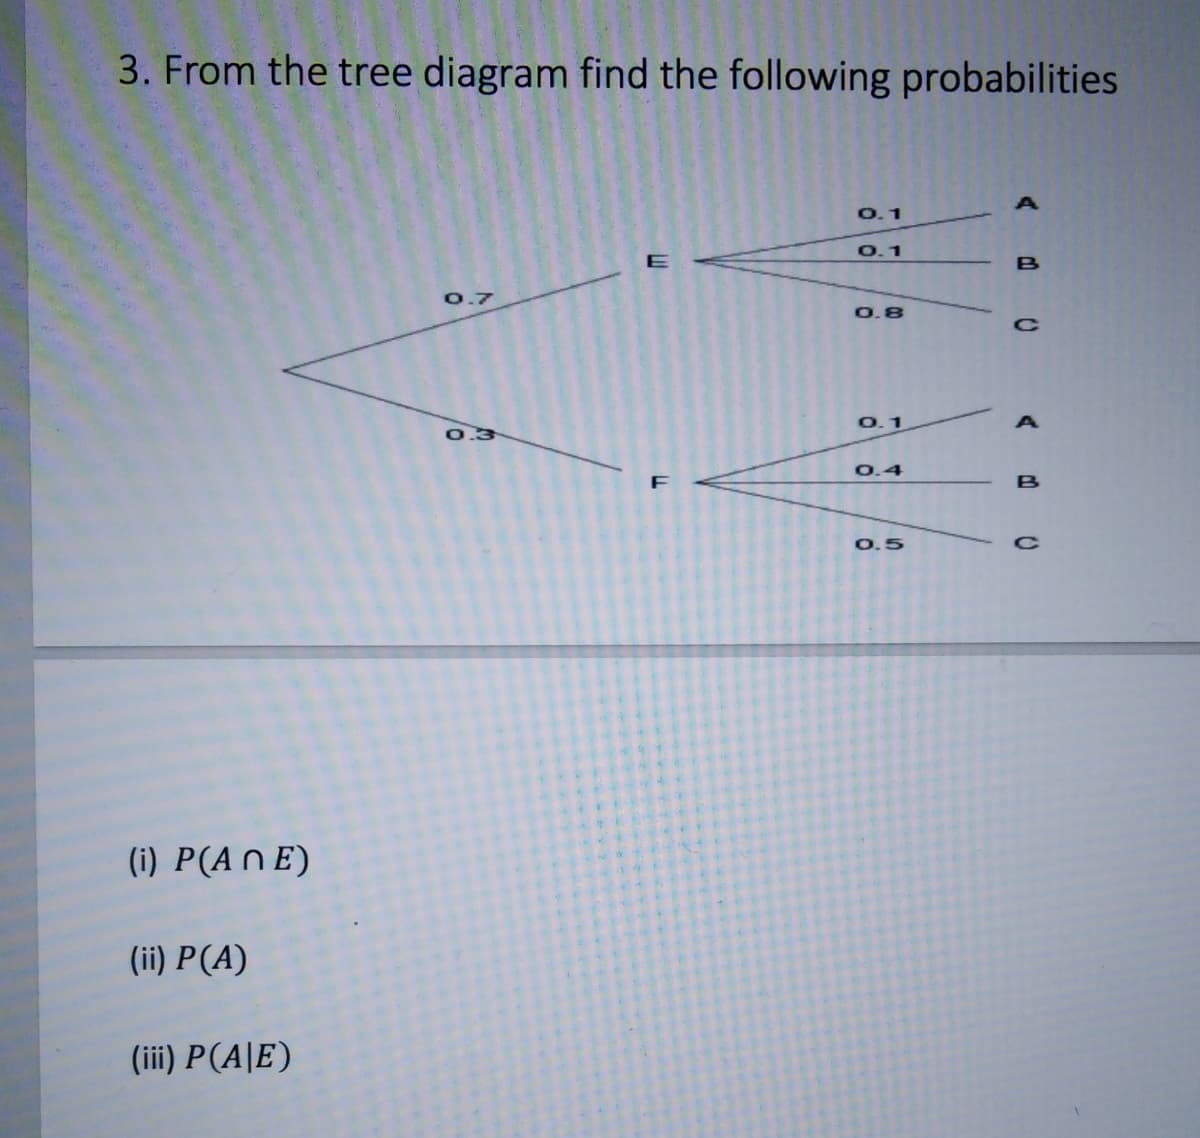 3. From the tree diagram find the following probabilities
0.1
0.1
E
B
0.7
0.8
0.1
0.3
0.4
B
0.5
(i) P(An E)
(ii) P(A)
(iii) P(A|E)
